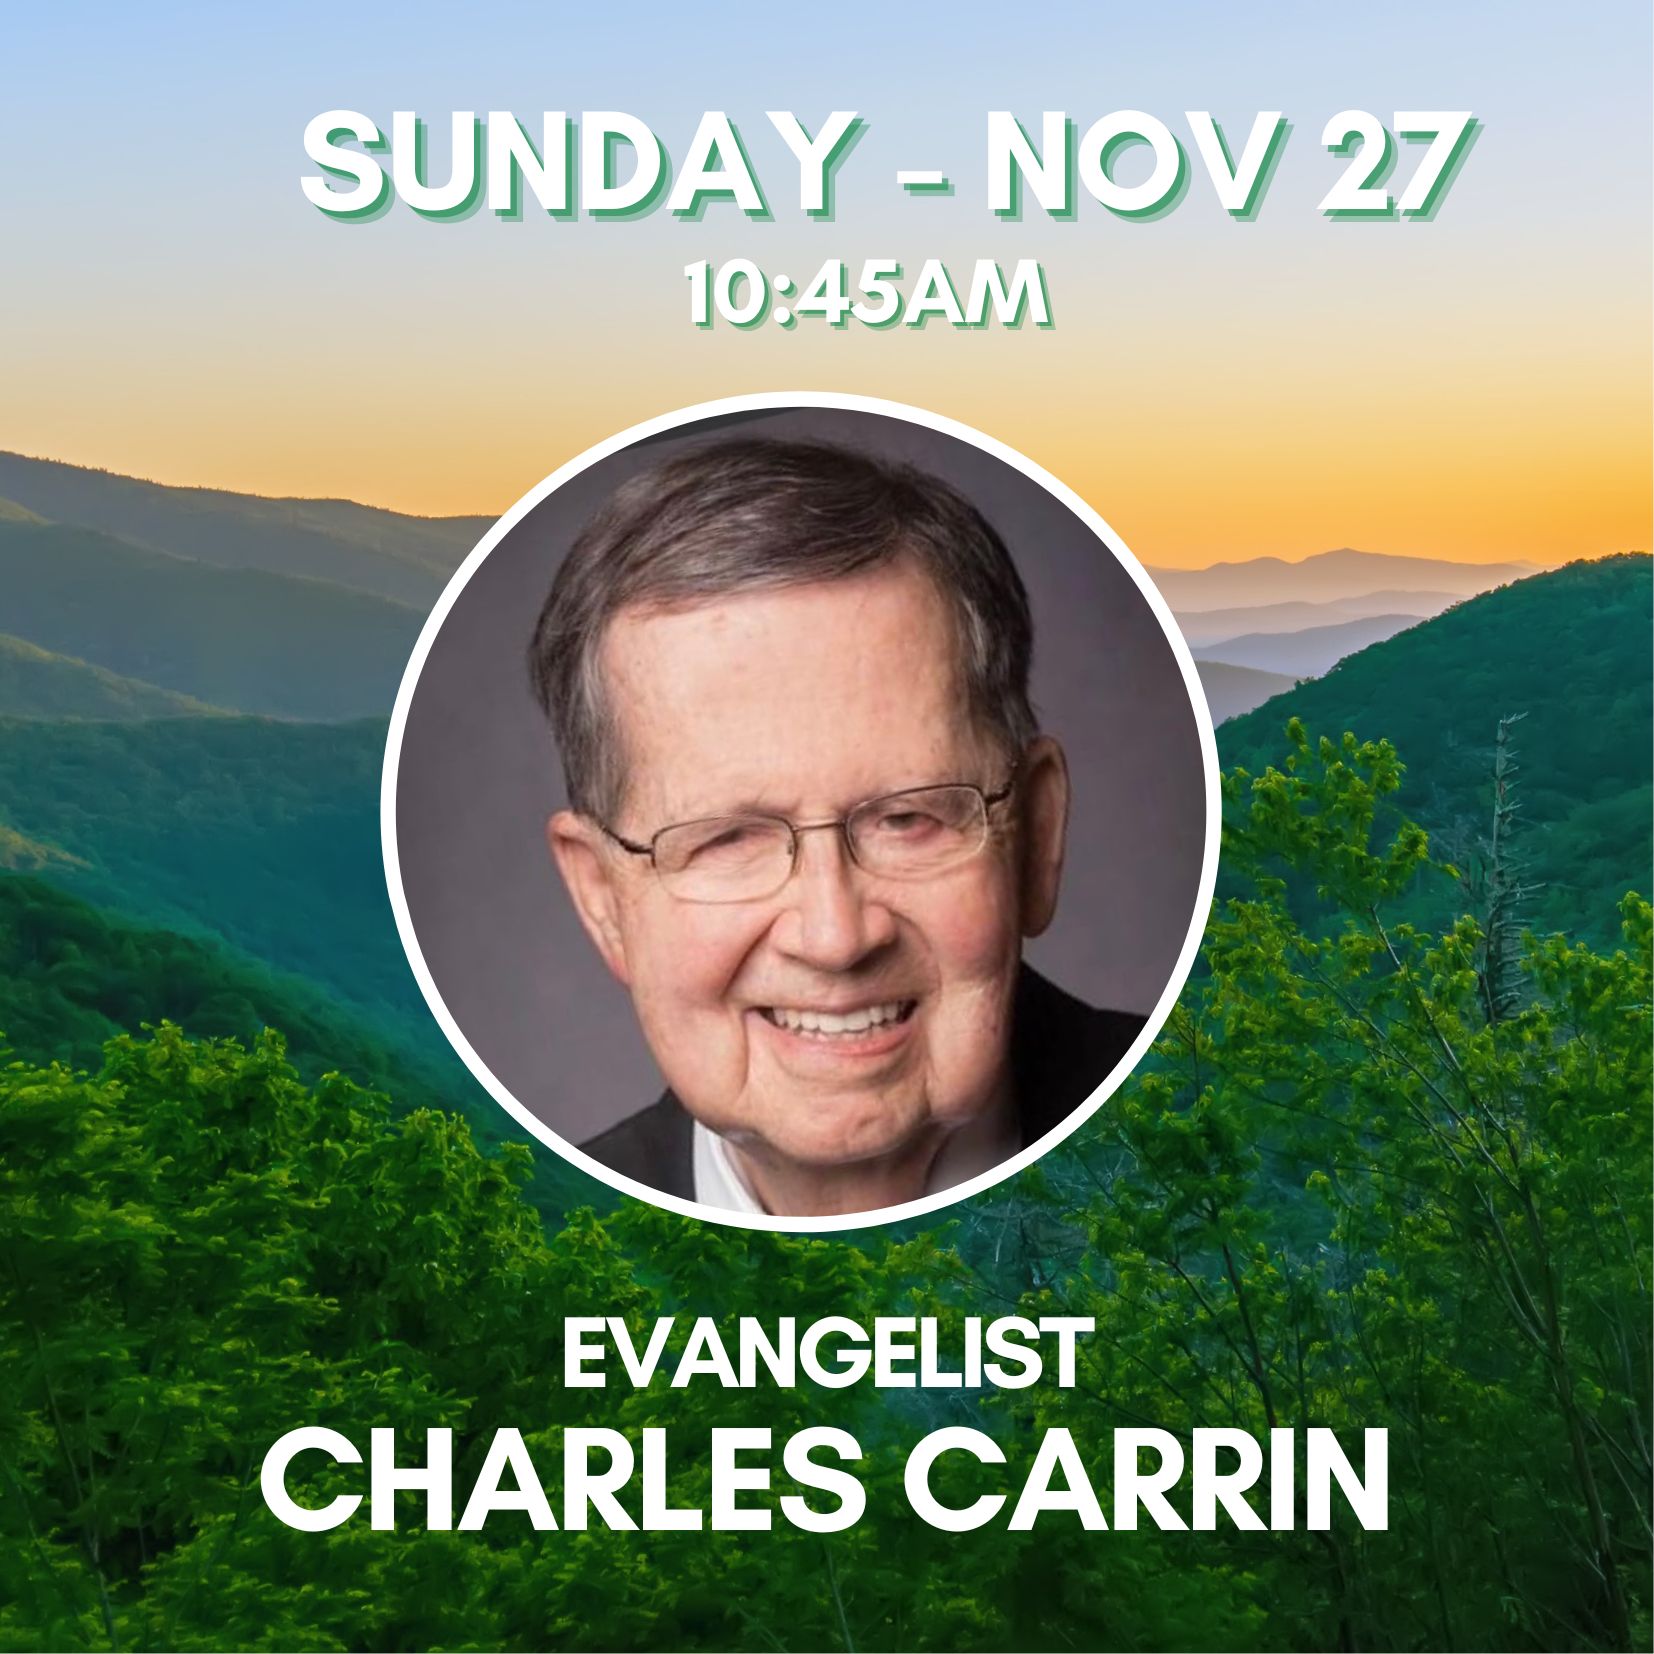 SPECIAL GUEST EVANGELIST CHARLES CARRIN